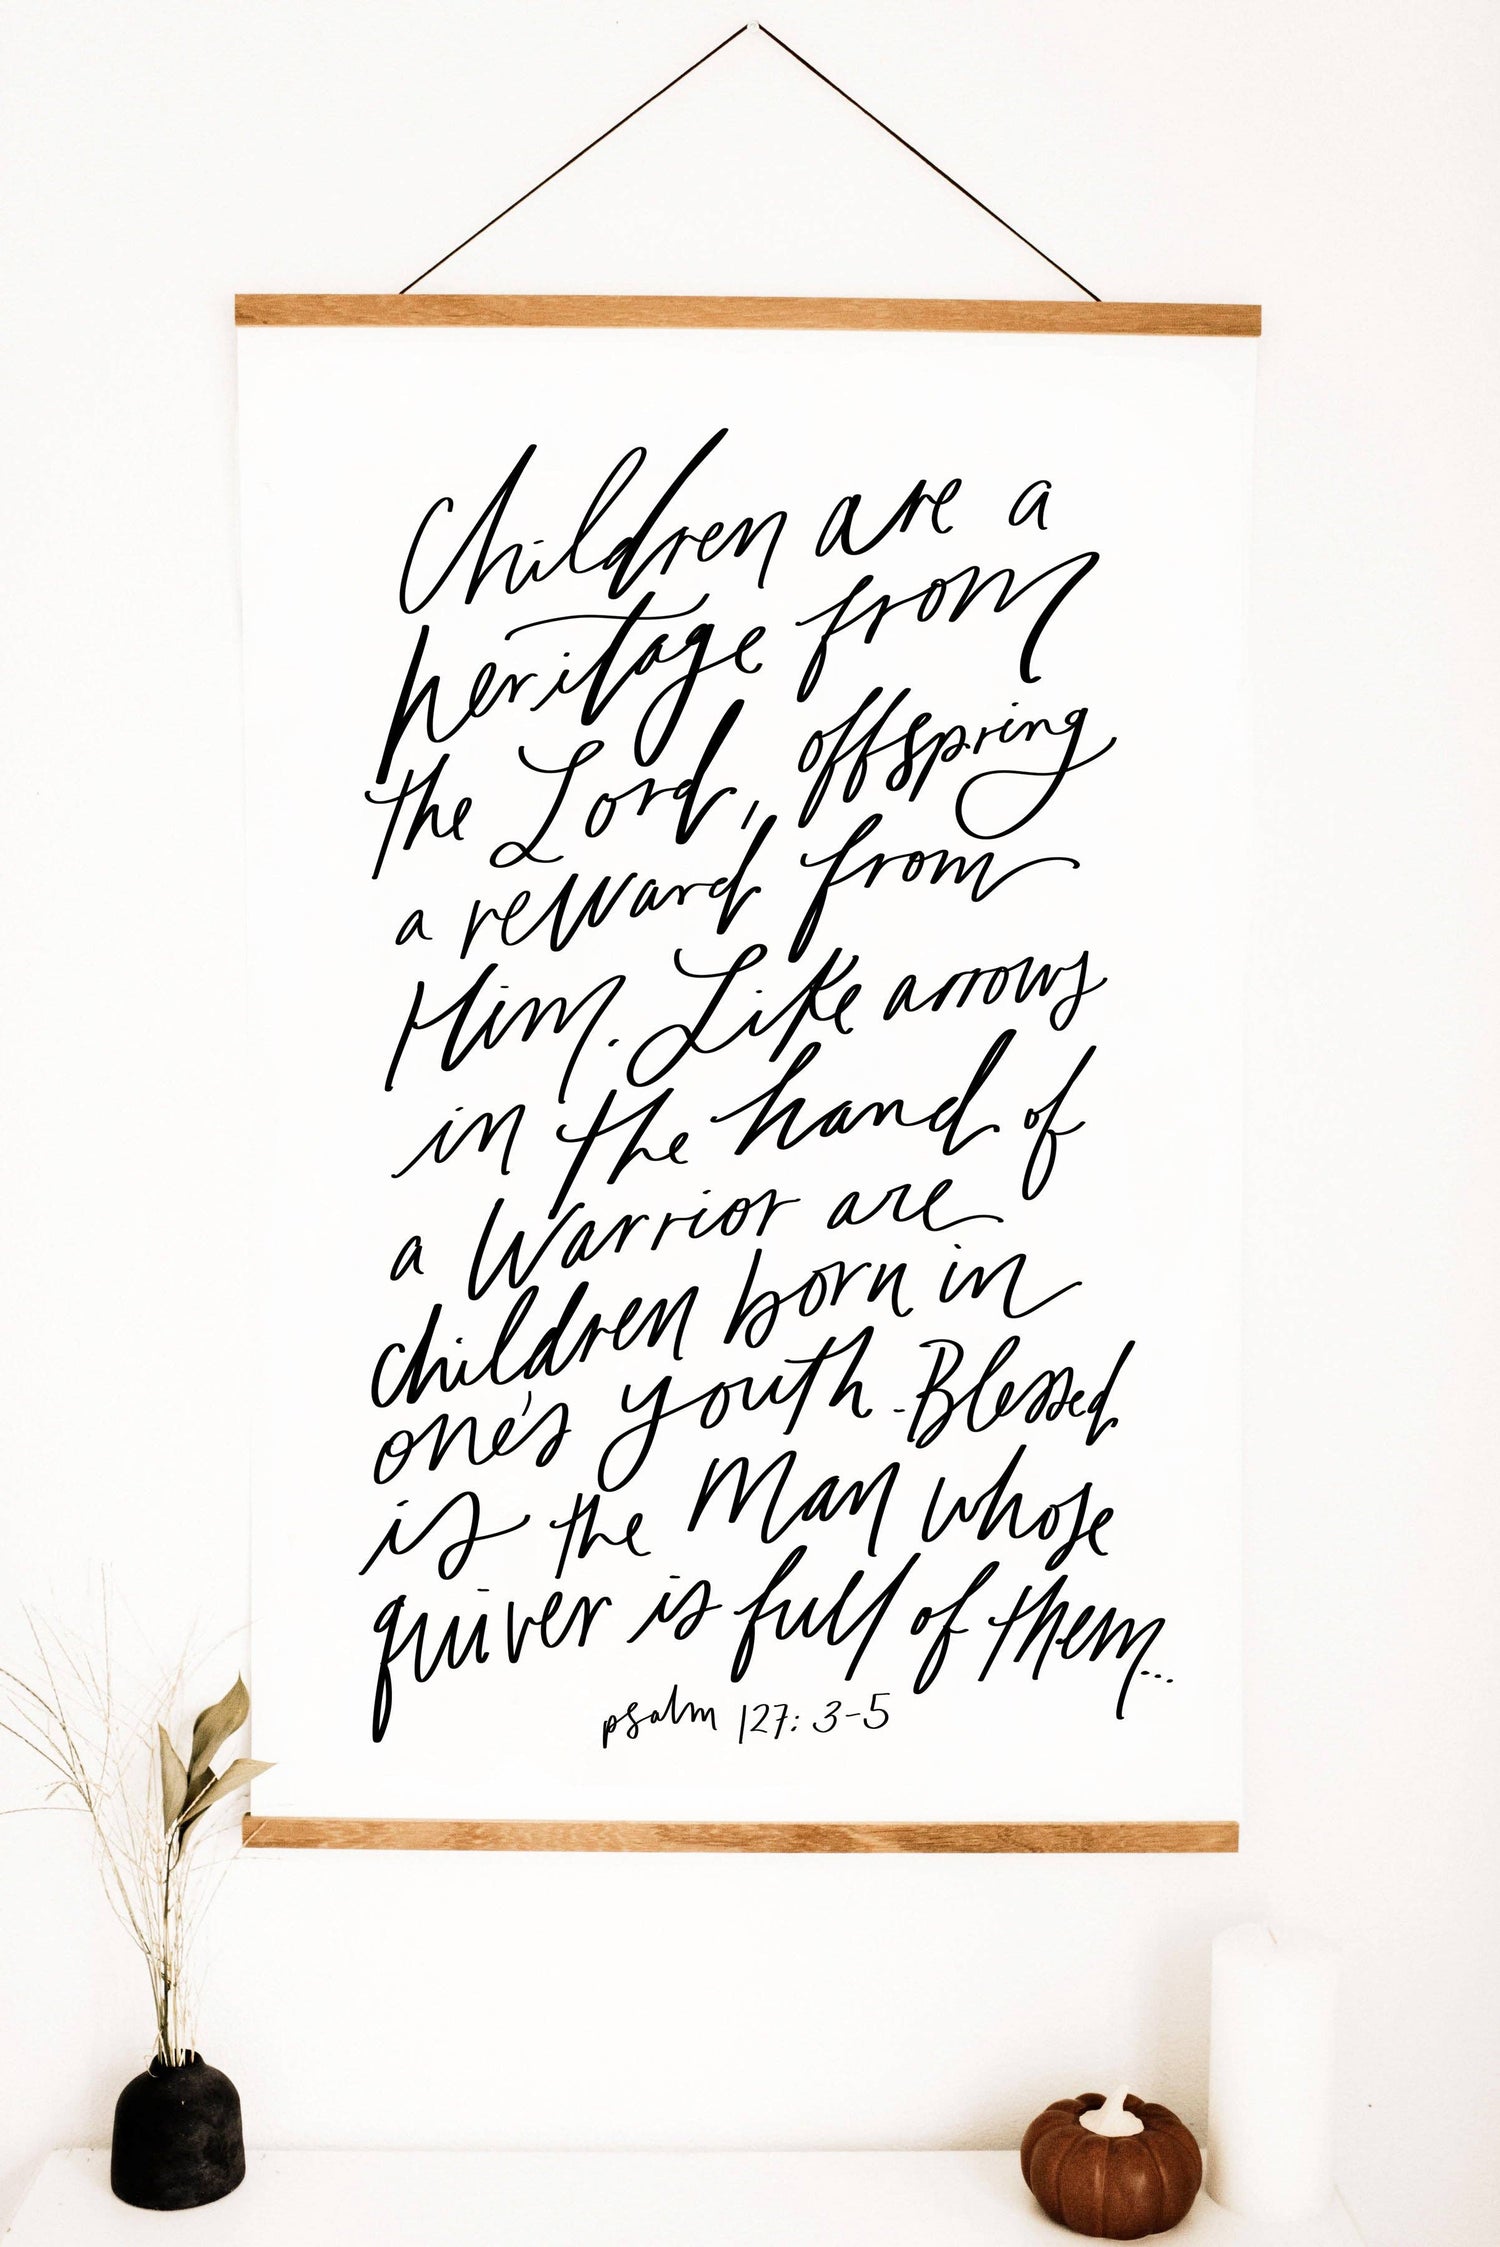 Children Are a Heritage Poster + banner wood